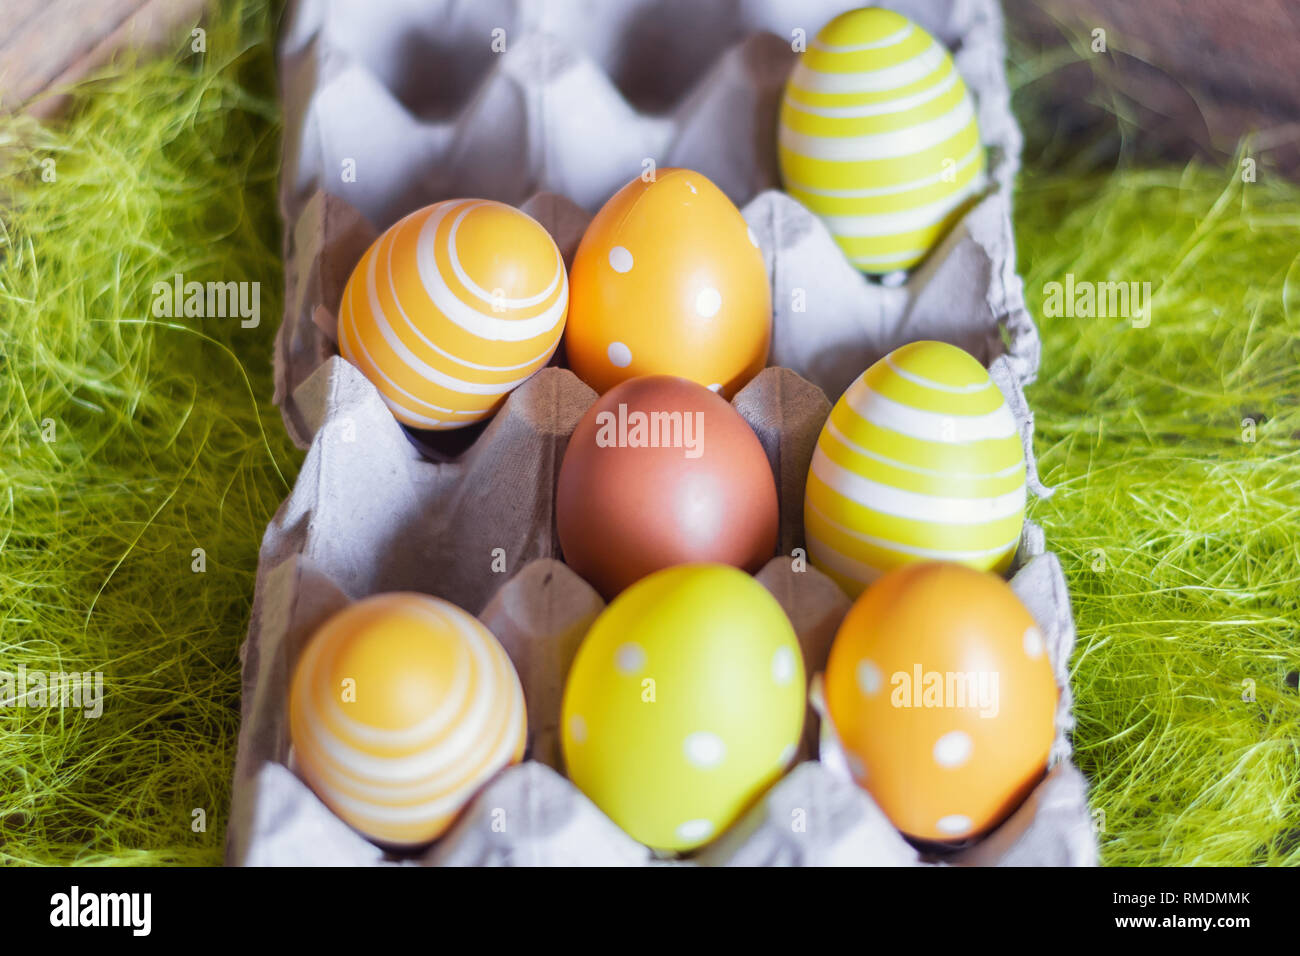 Easter composition with egg box filled with seven fake eggs and a real brown egg. Stock Photo